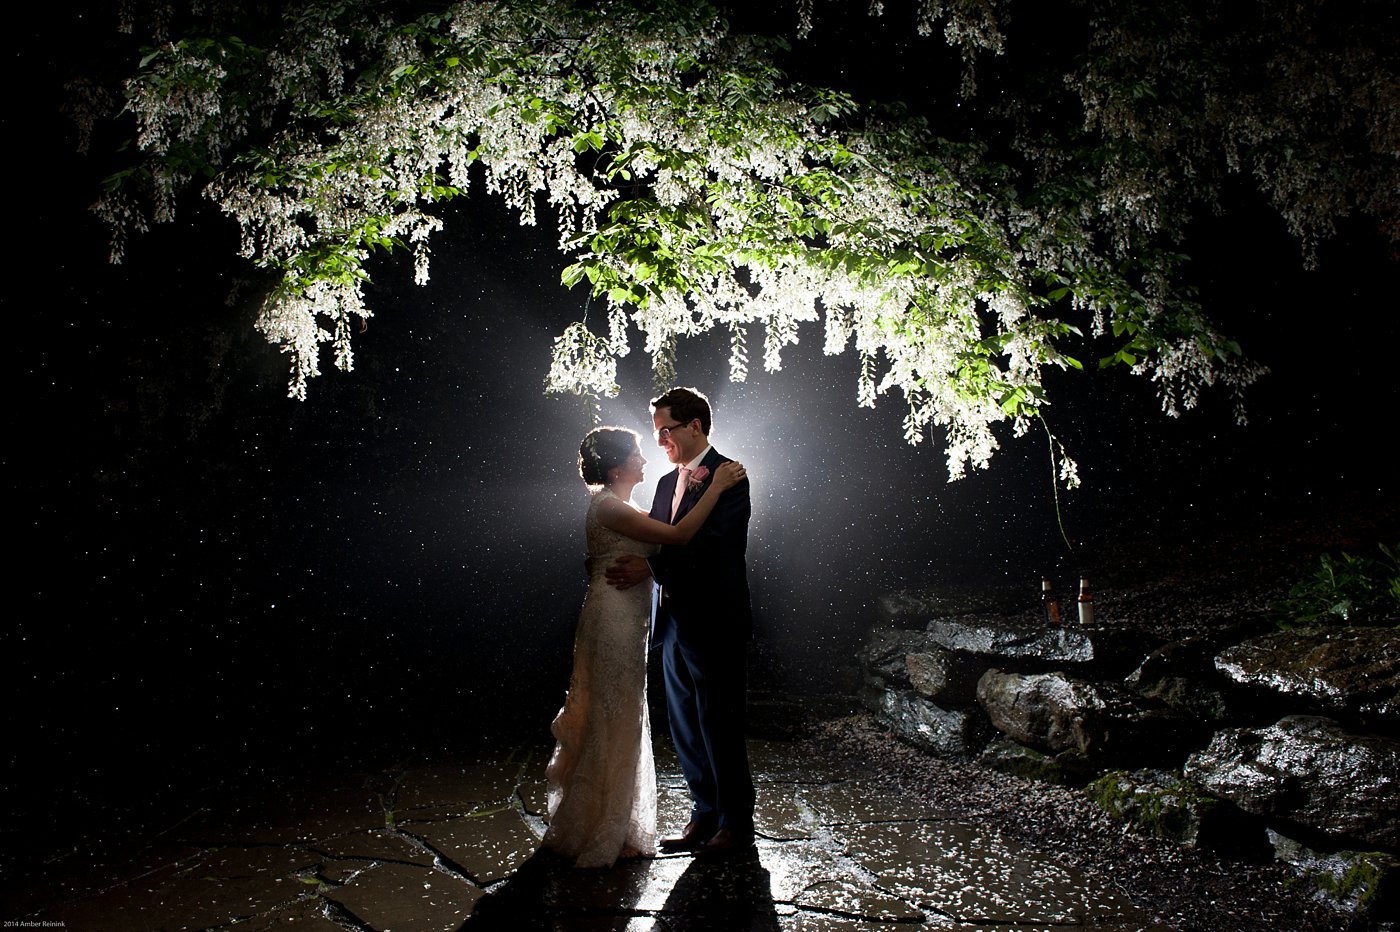 Bride and groom night time silhouette picture under white flowering tree in the rain Thorpewood Mountain Memories wedding Thurmont, MD